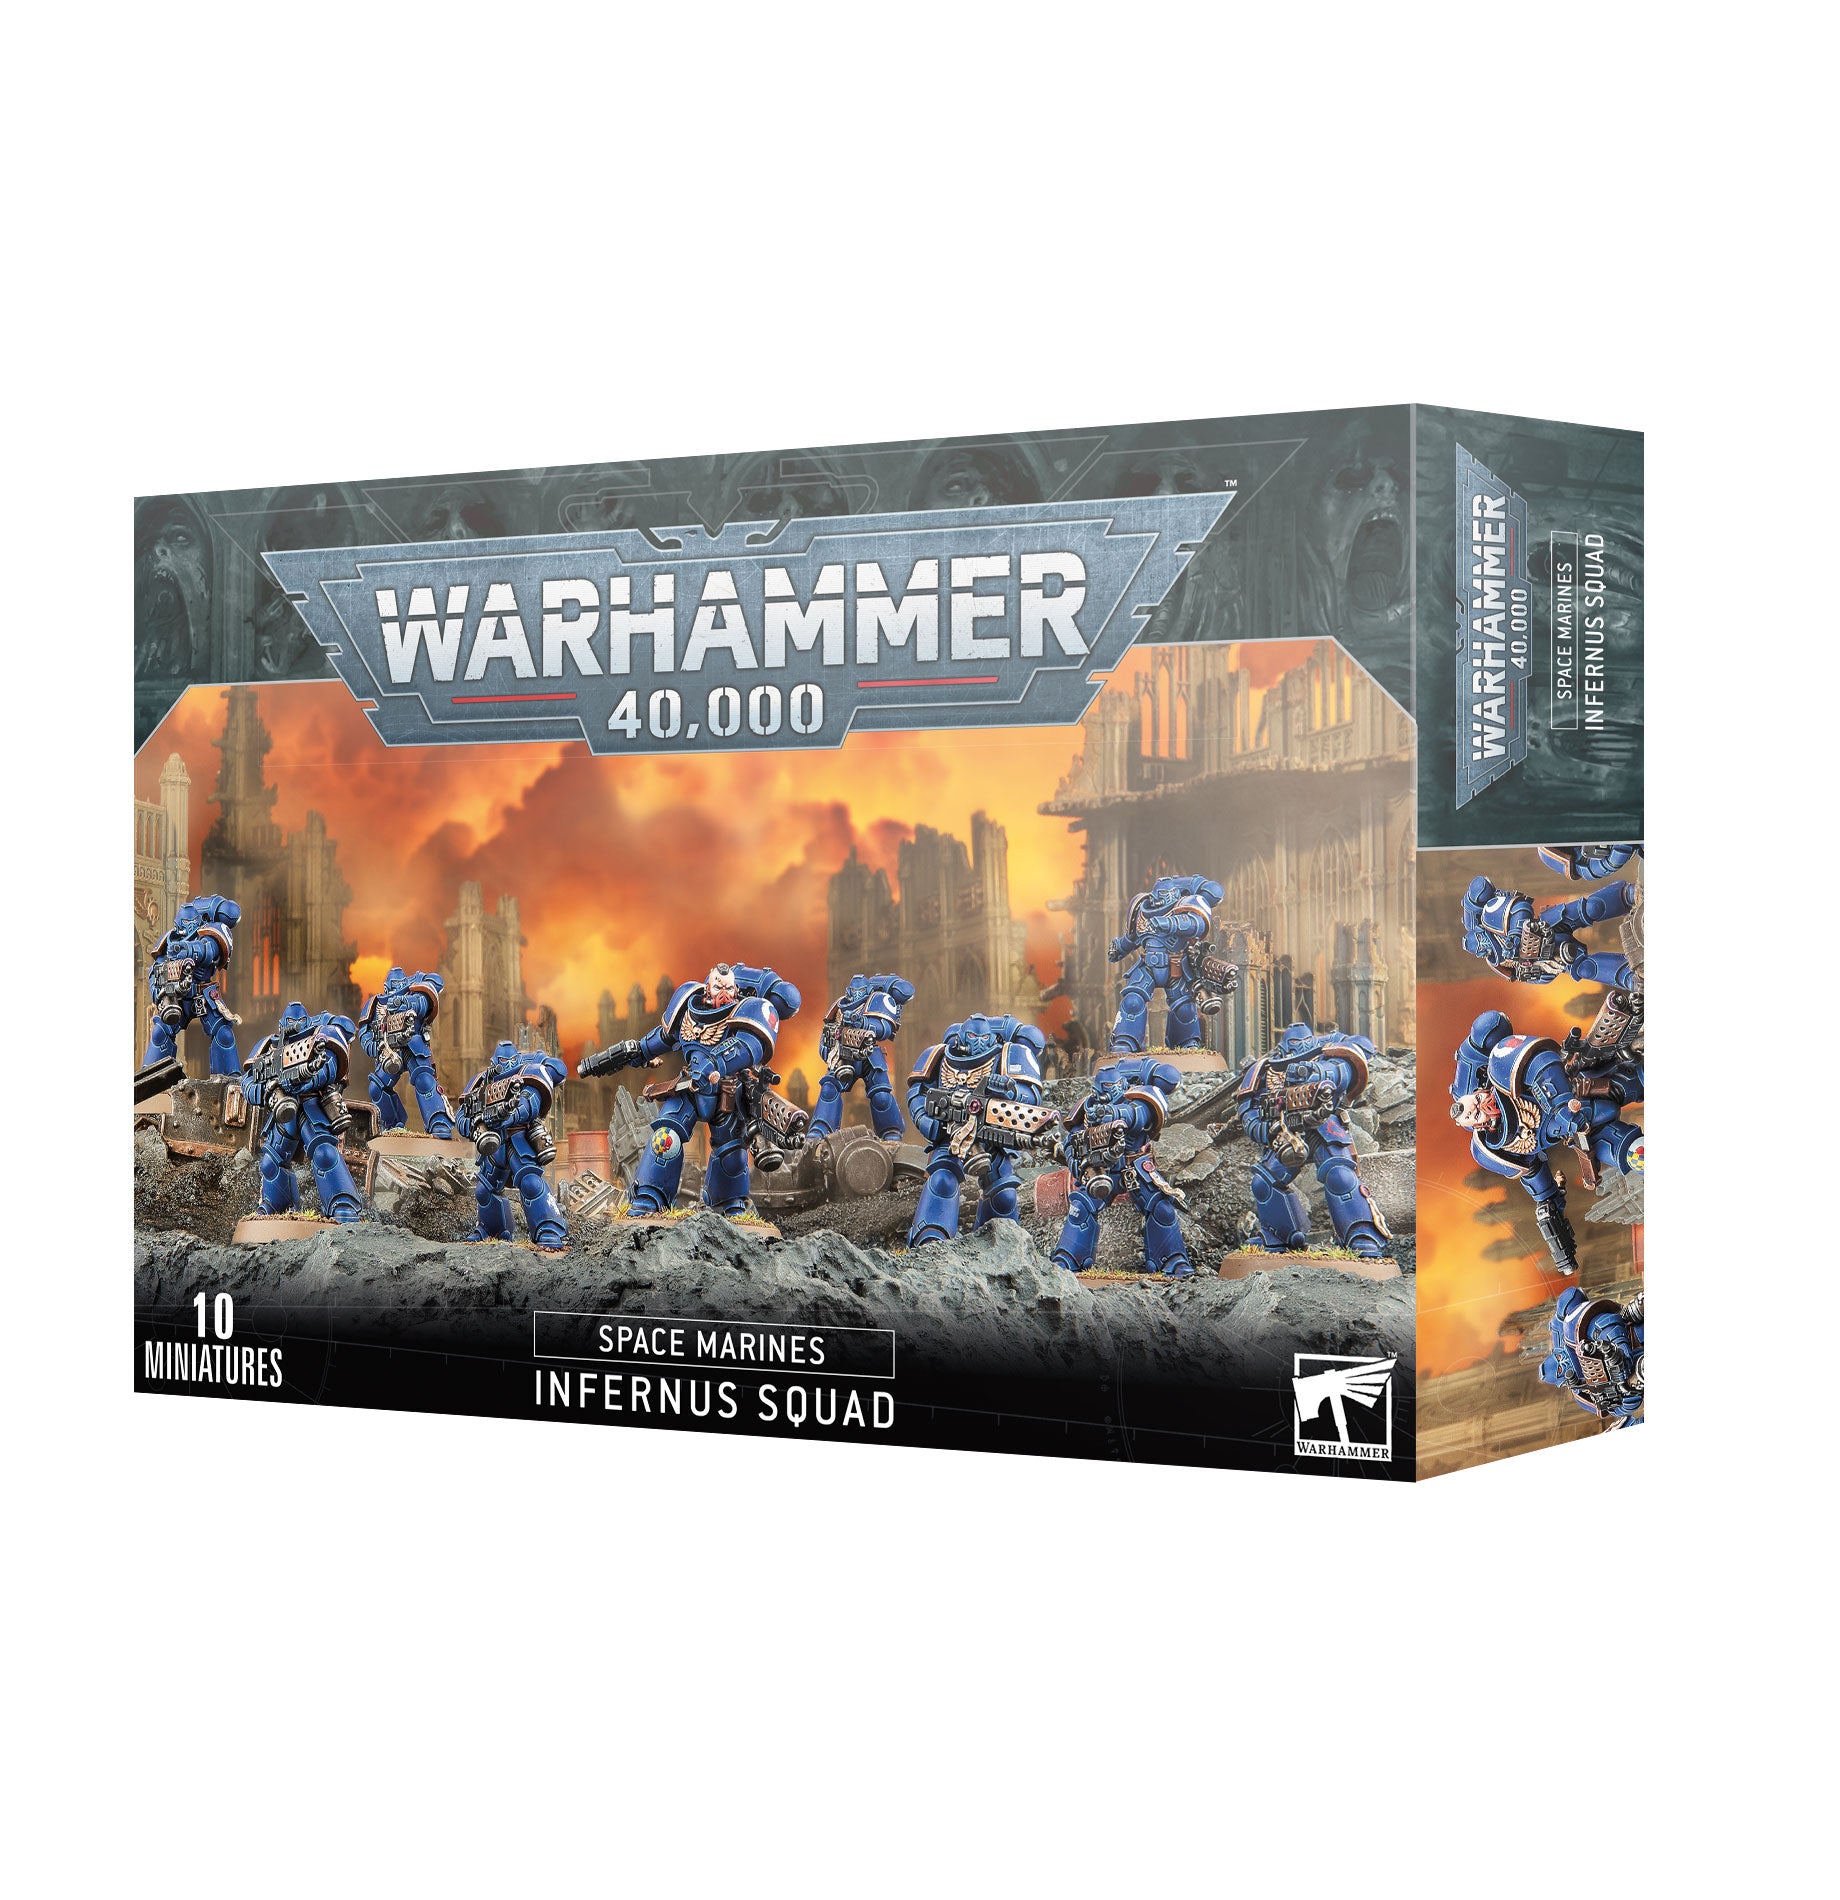 Space Marines: Infernus Squad - Release Date 2/3/24 - Loaded Dice